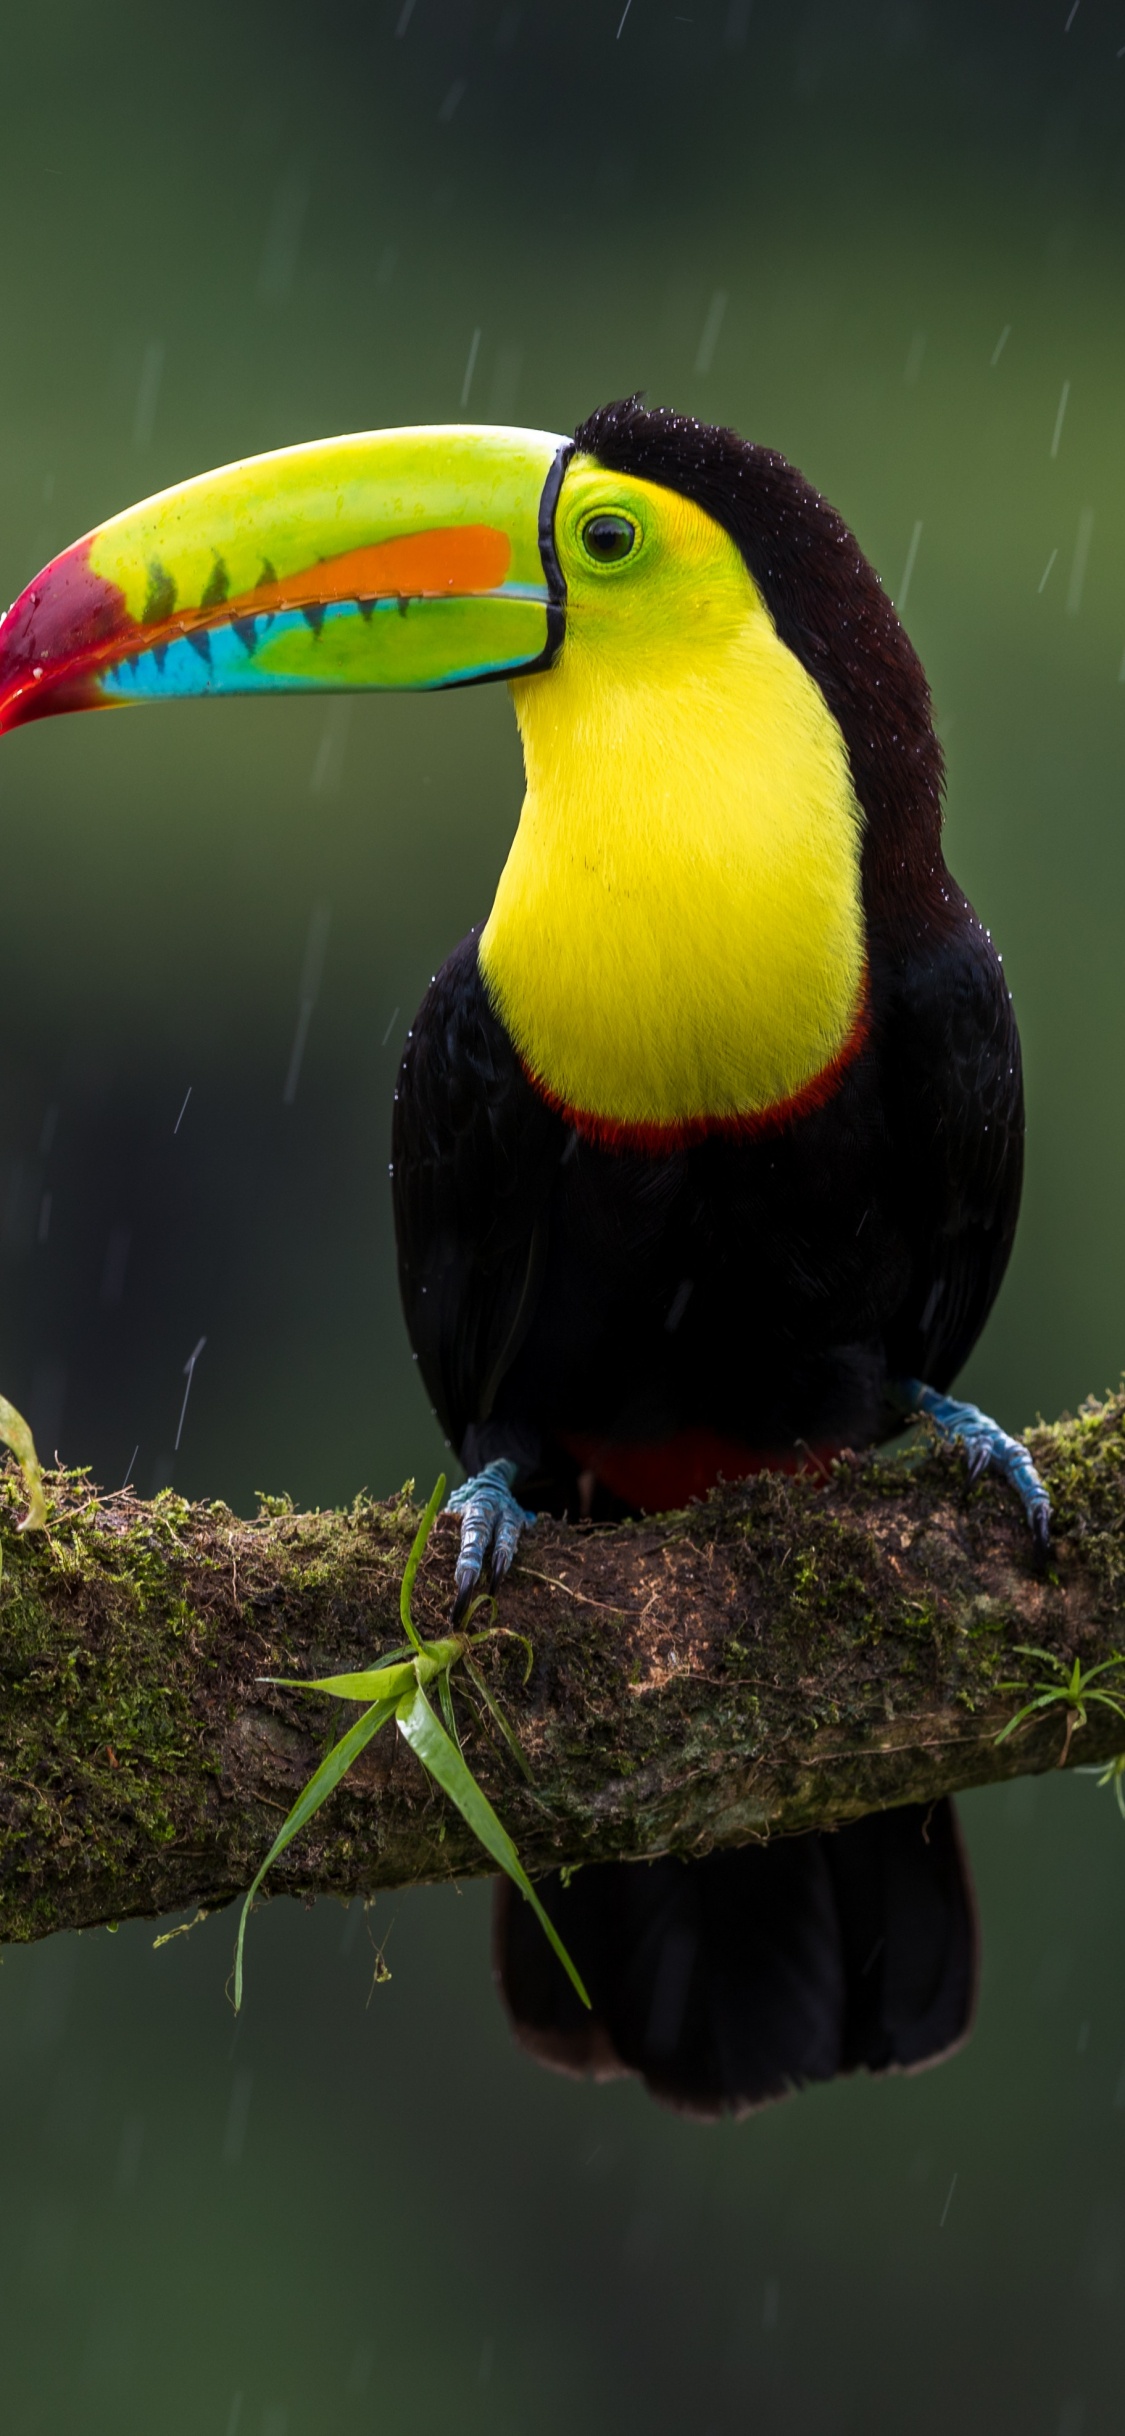 Black Yellow and Red Bird on Tree Branch. Wallpaper in 1125x2436 Resolution